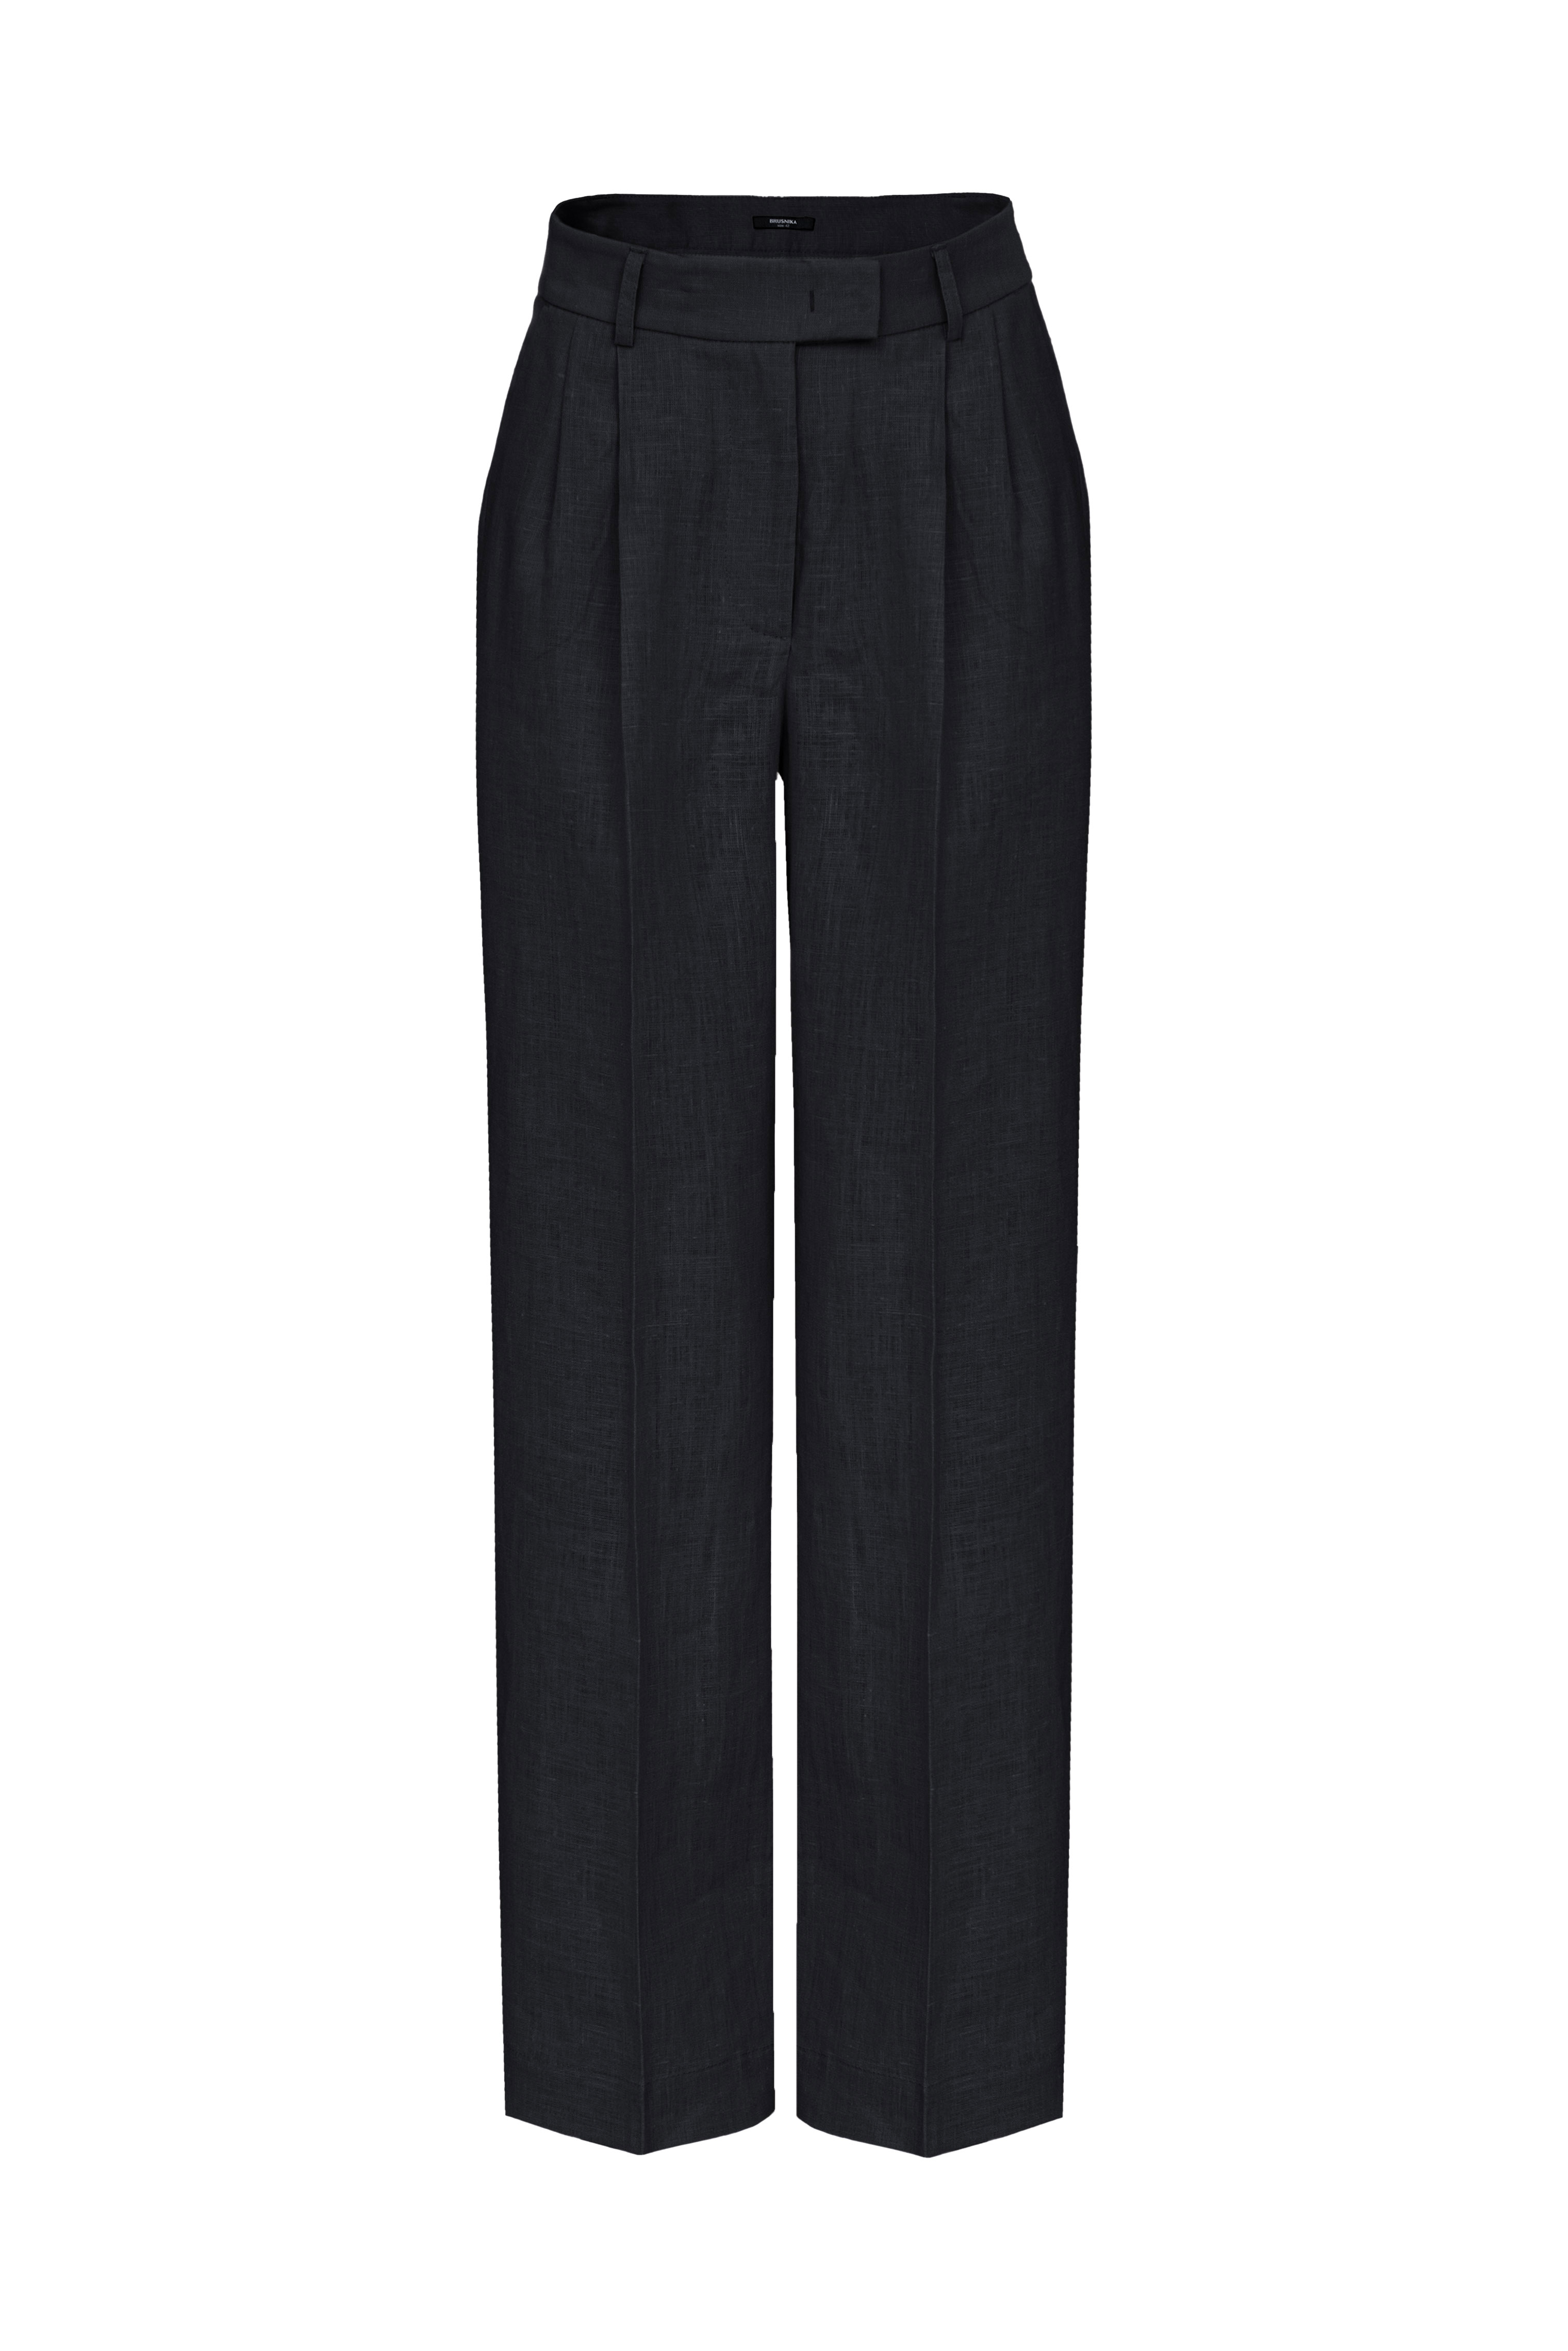 Trousers 4502-01 Black from BRUSNiKA